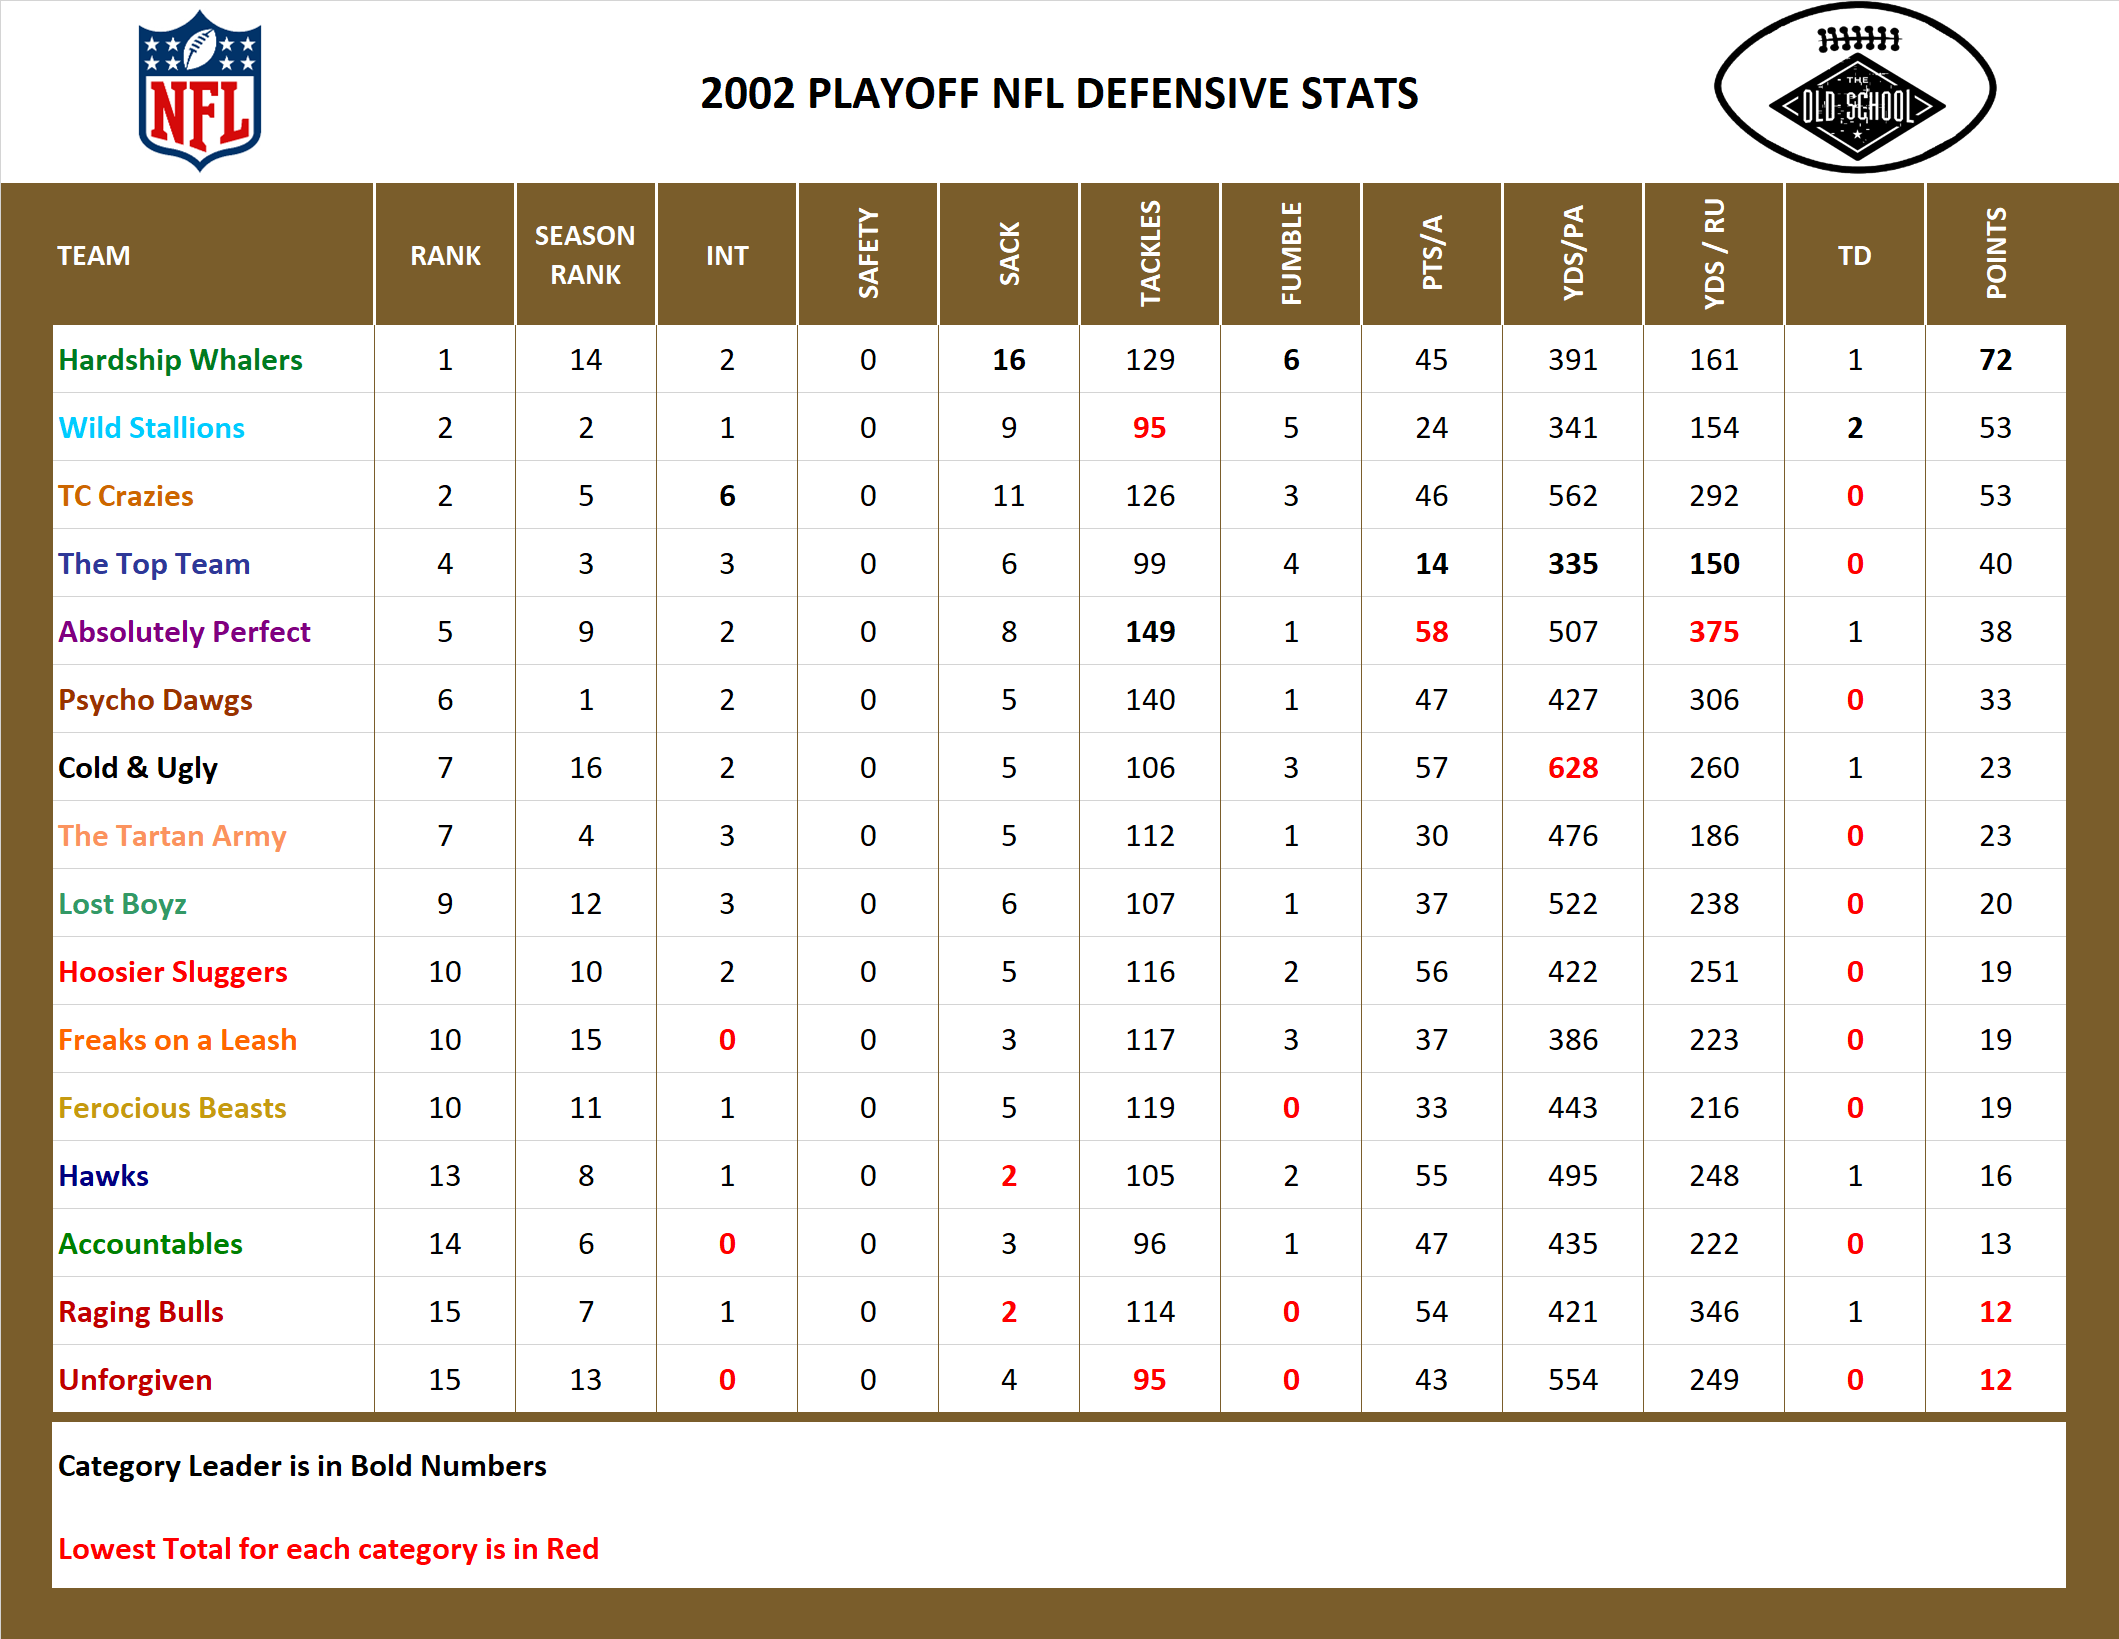 2002 National Football League Pool Playoff Defensive Stats